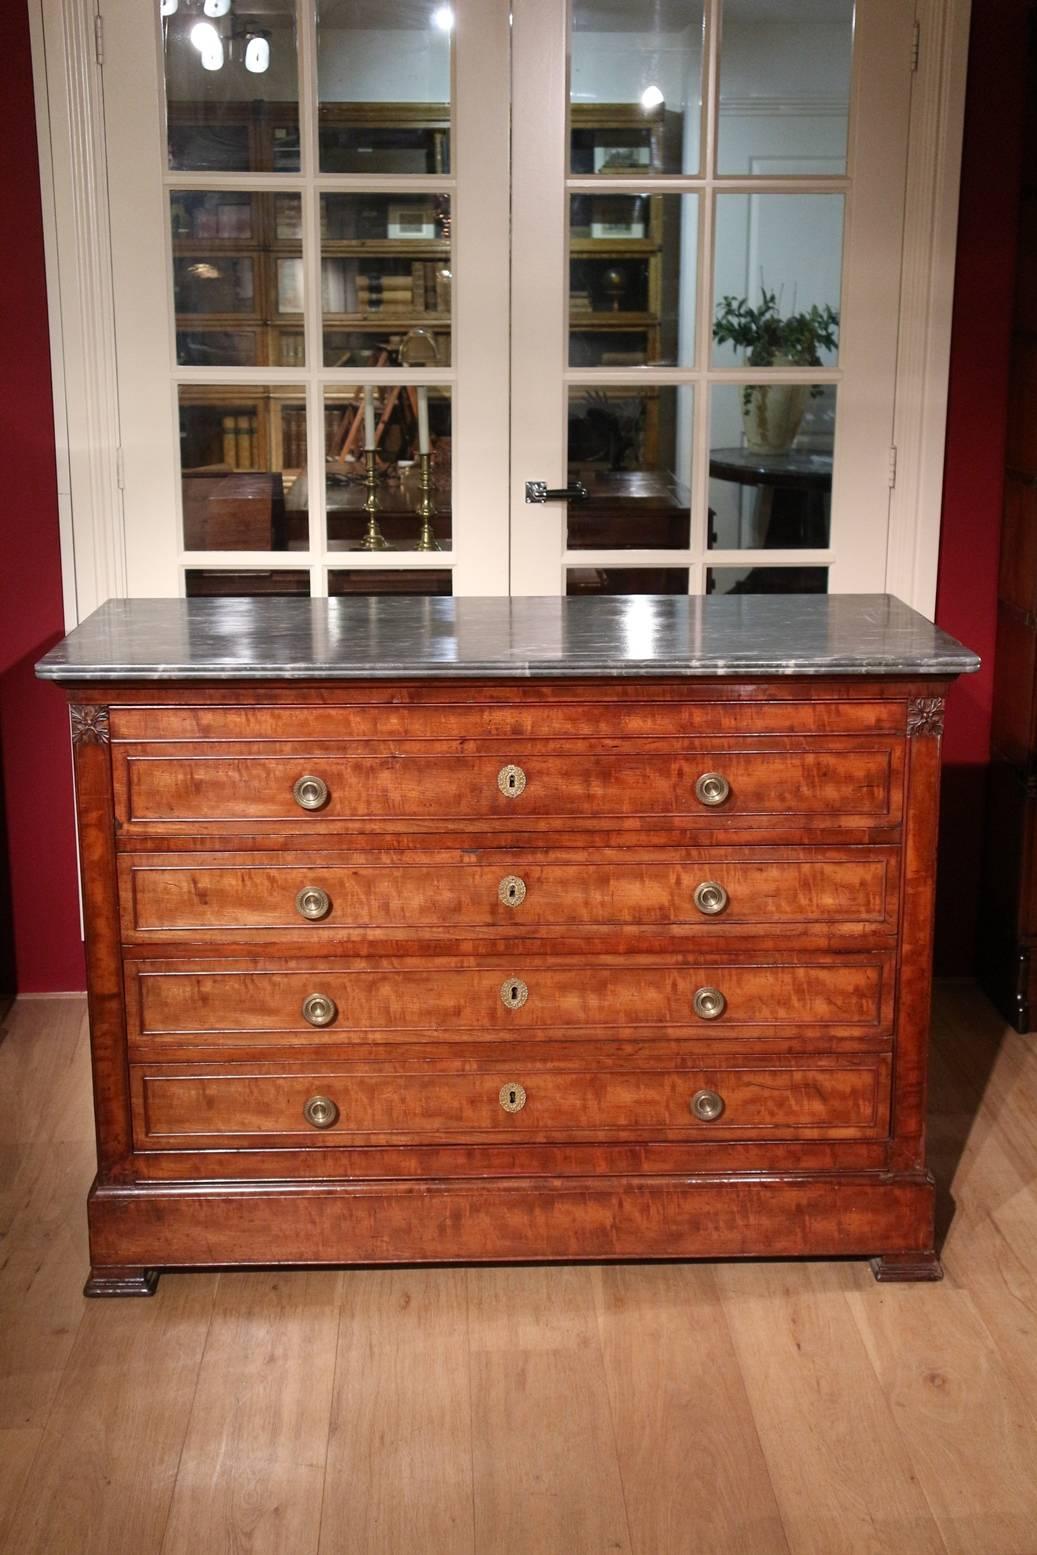 Beautiful walnut chest of drawers with secretary drawer. Impressive design with bronze drawer pullers and fire-plated key plates. Beautifully lived leather. The desk section is large enough to use. The marble blade has a damage.

Origin: